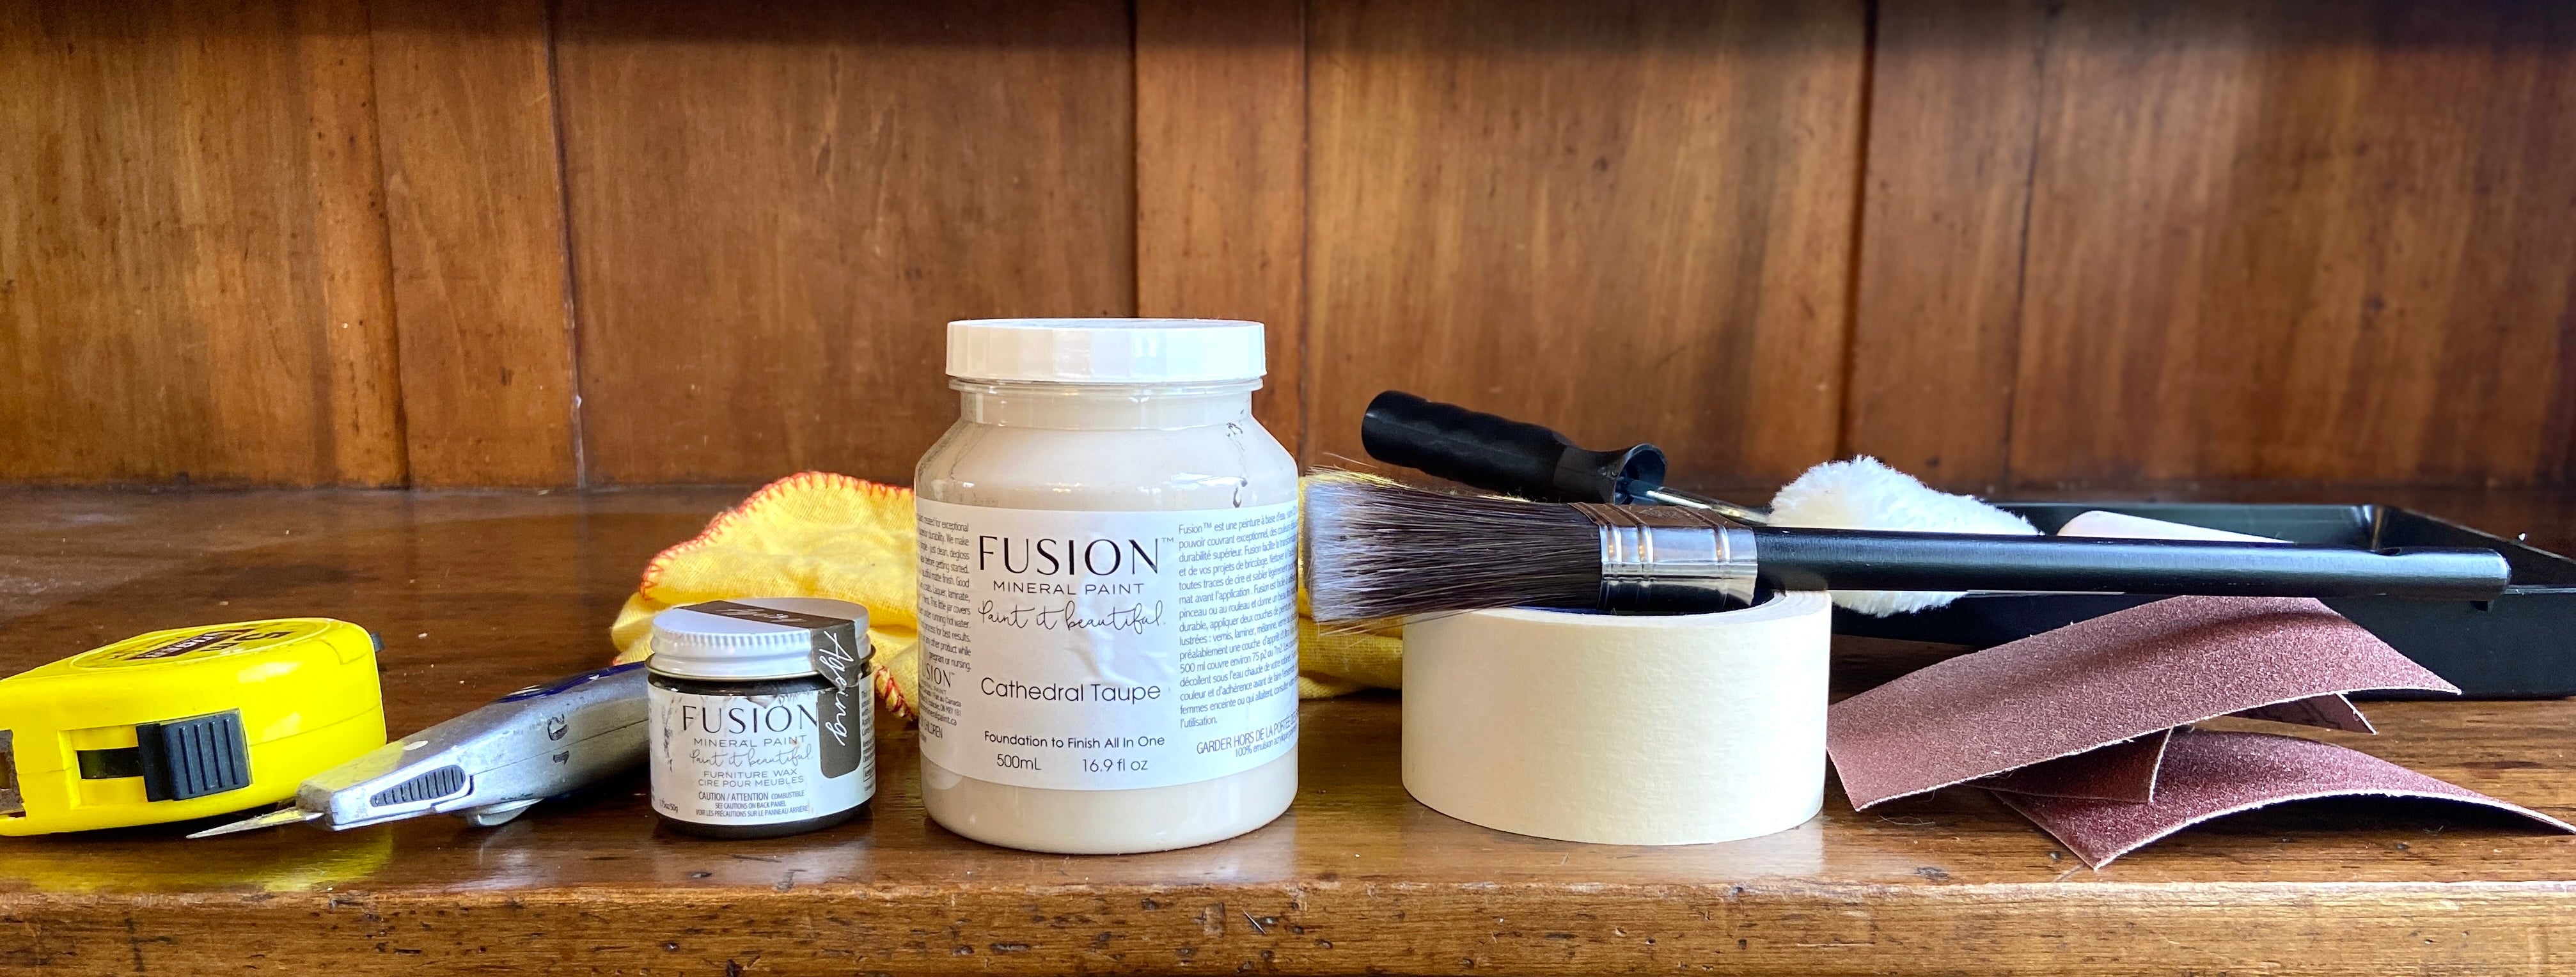 Fusion Mineral paint preparation supplies and how to paint furniture, Vintage Frog